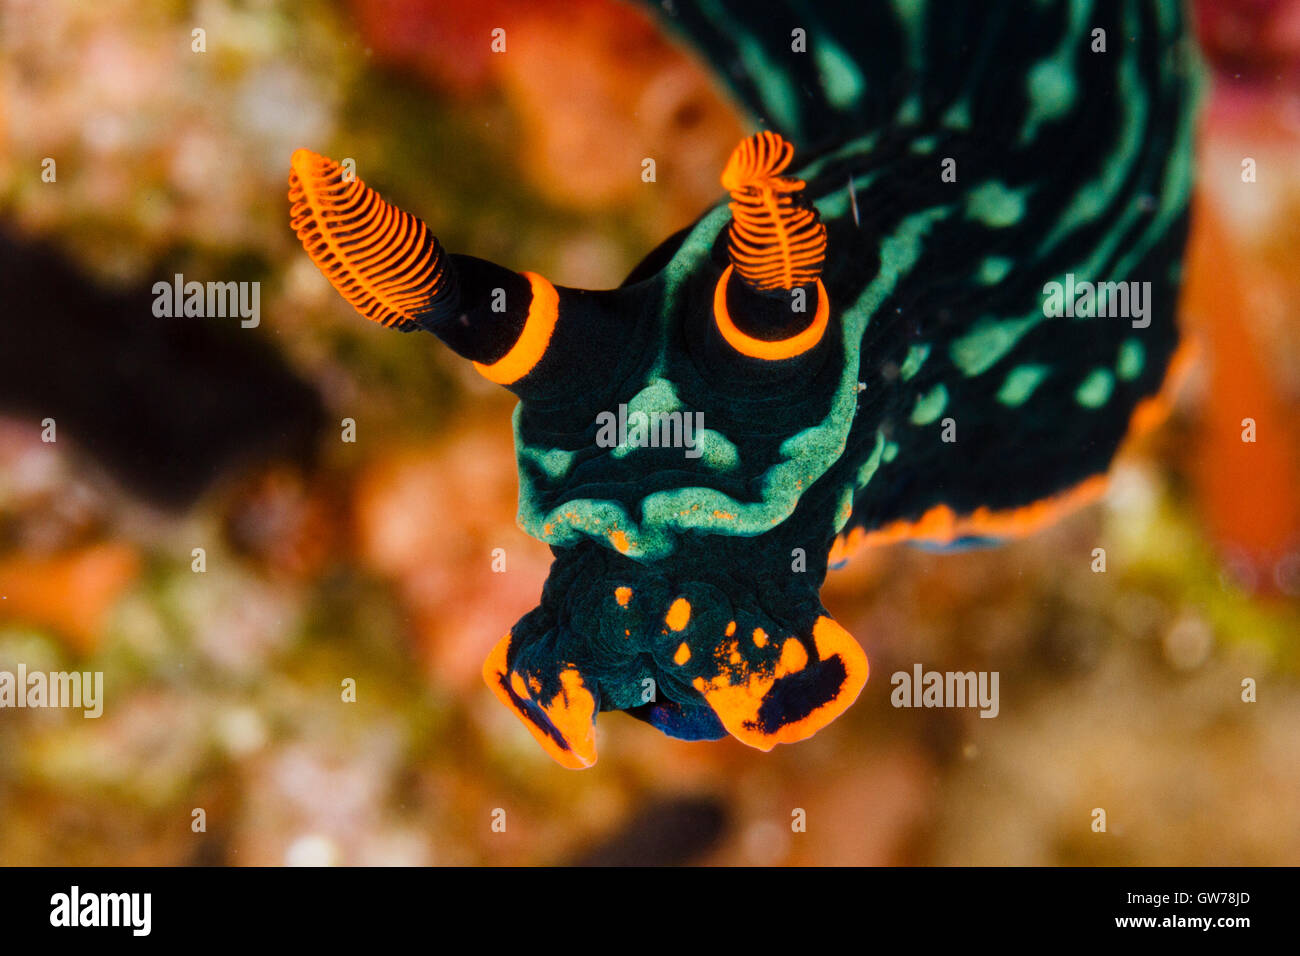 Dumaguete, Philippines. 12th Sep, 2016. These unusual creatures were spotted during a days muck diving off Dumaguete in the Philippines. A Nudibranch (a type of seaslug) seemingly hangs in mid water, Dunaguete, Philippines. Credit:  Ed Brown/Alamy Live News Stock Photo